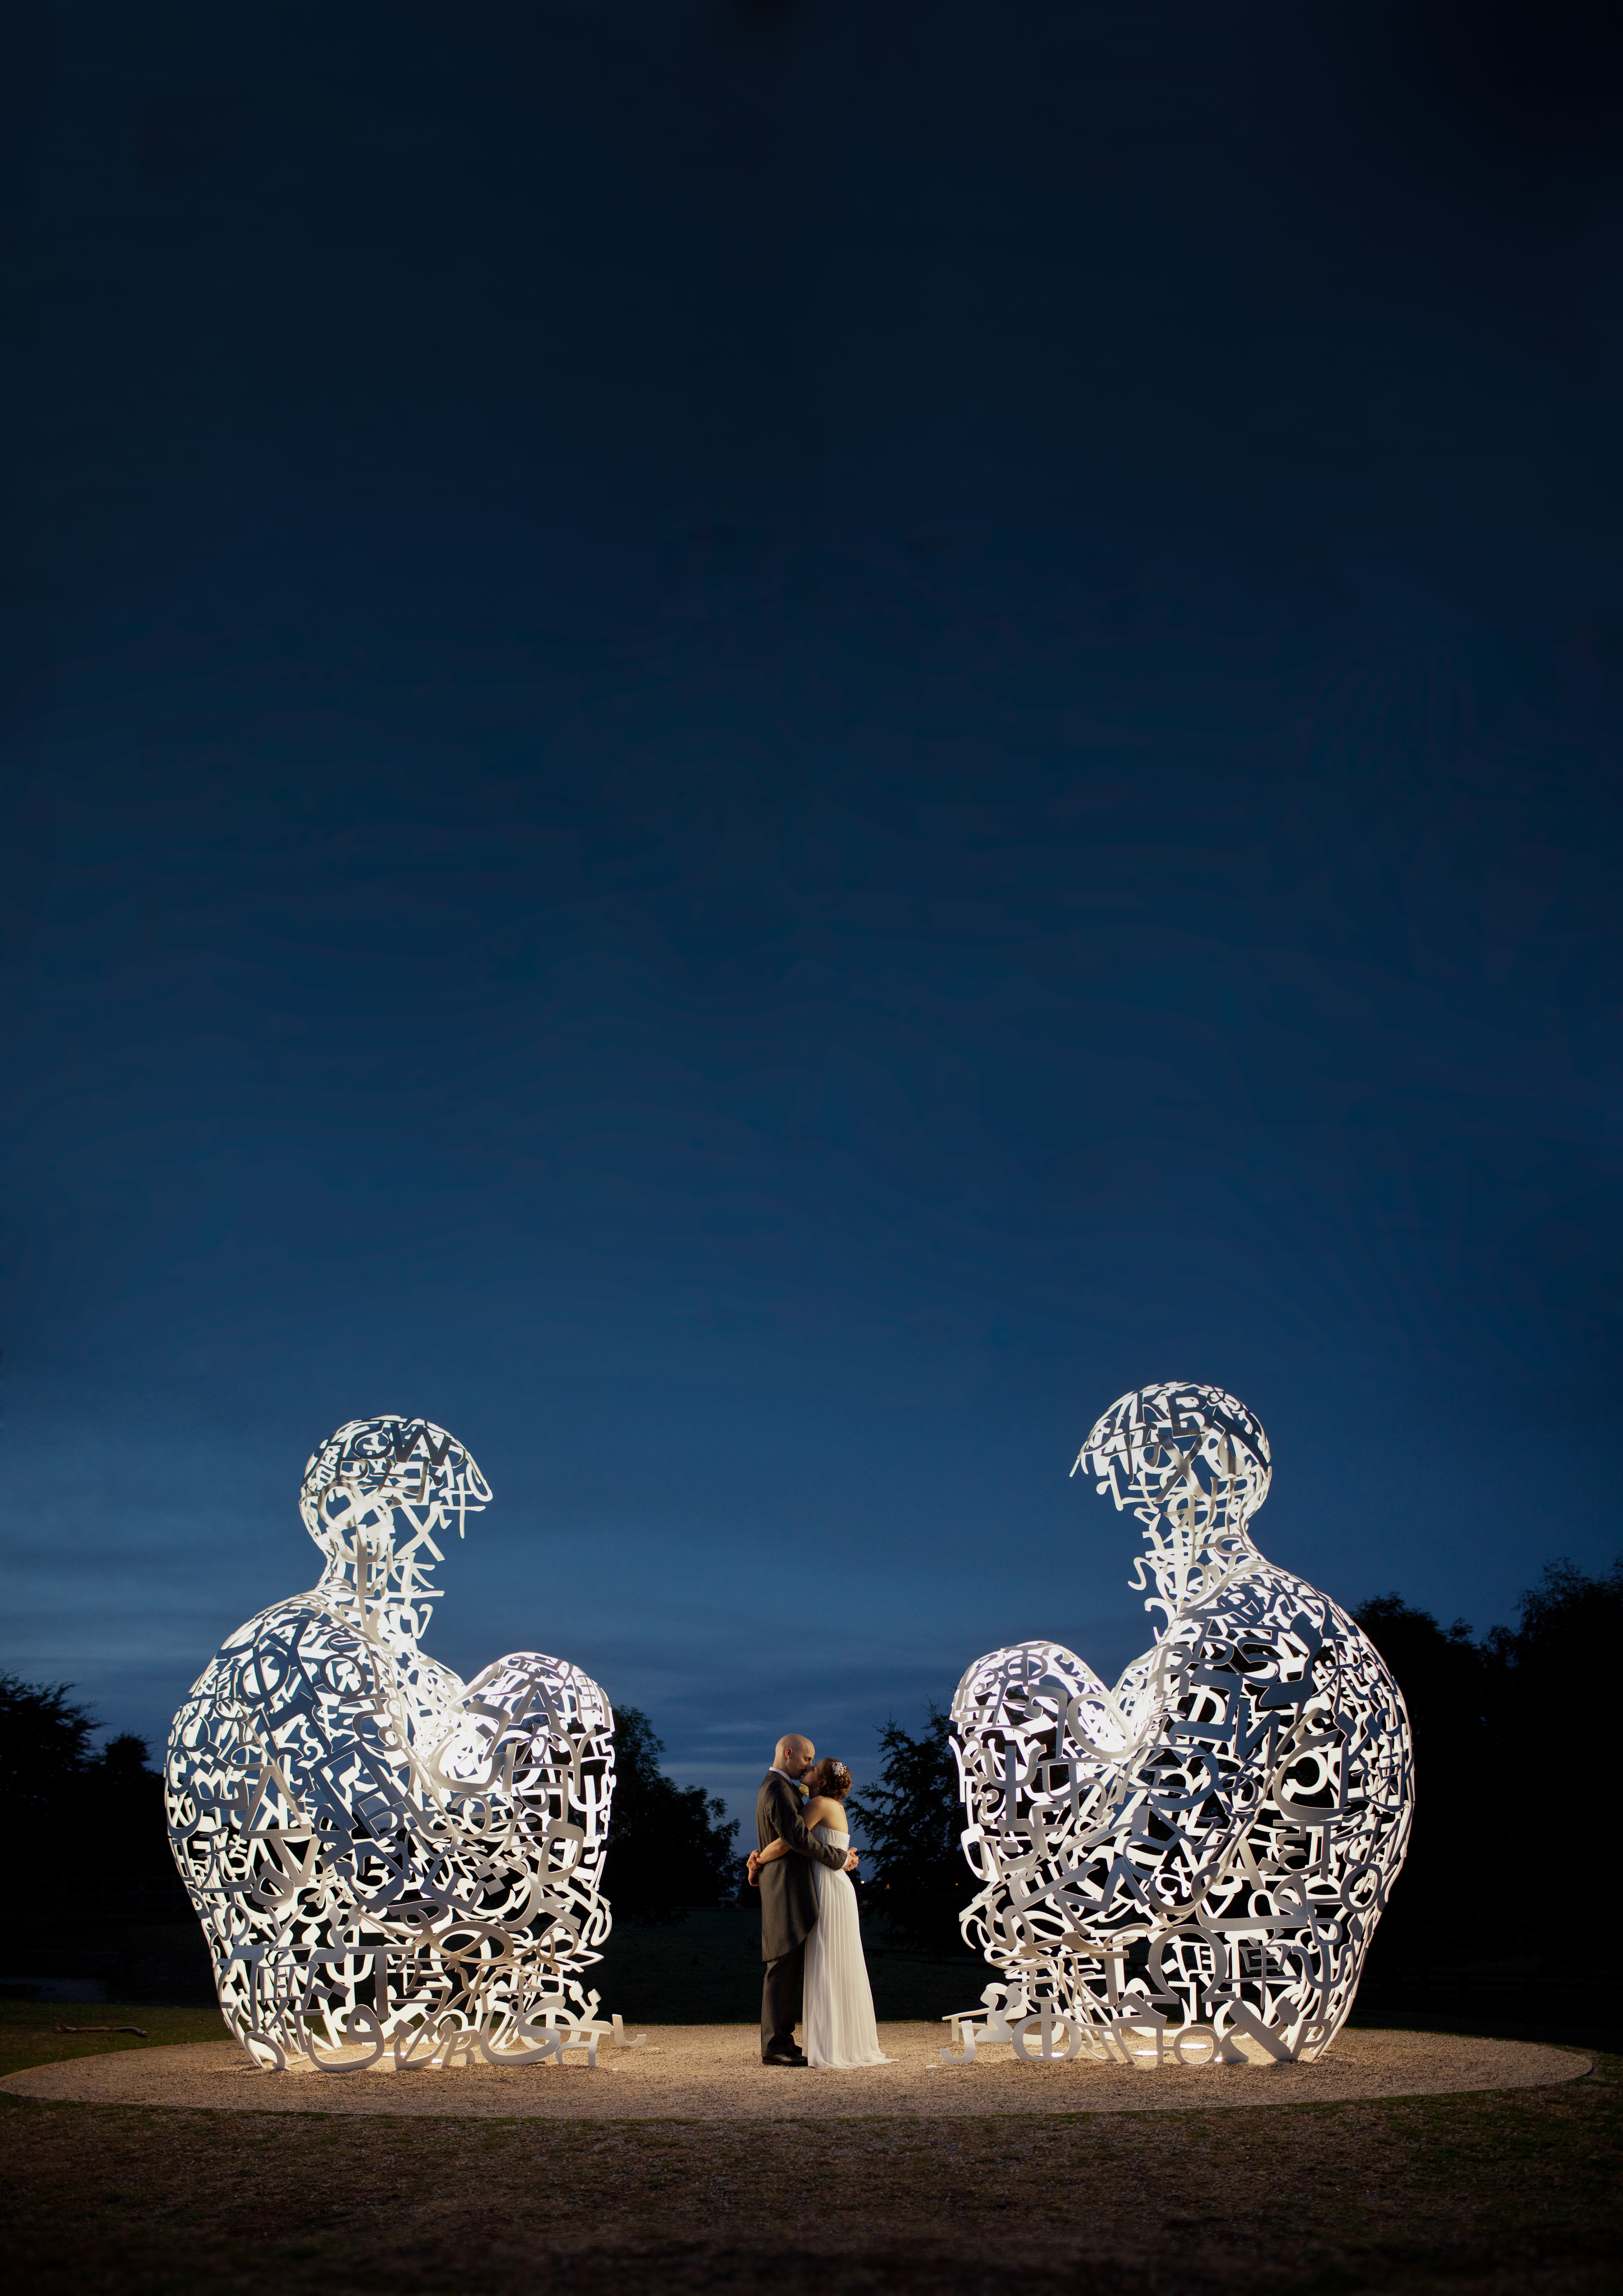 A bride and groom standing between two sculptures of sitting human figures at night.